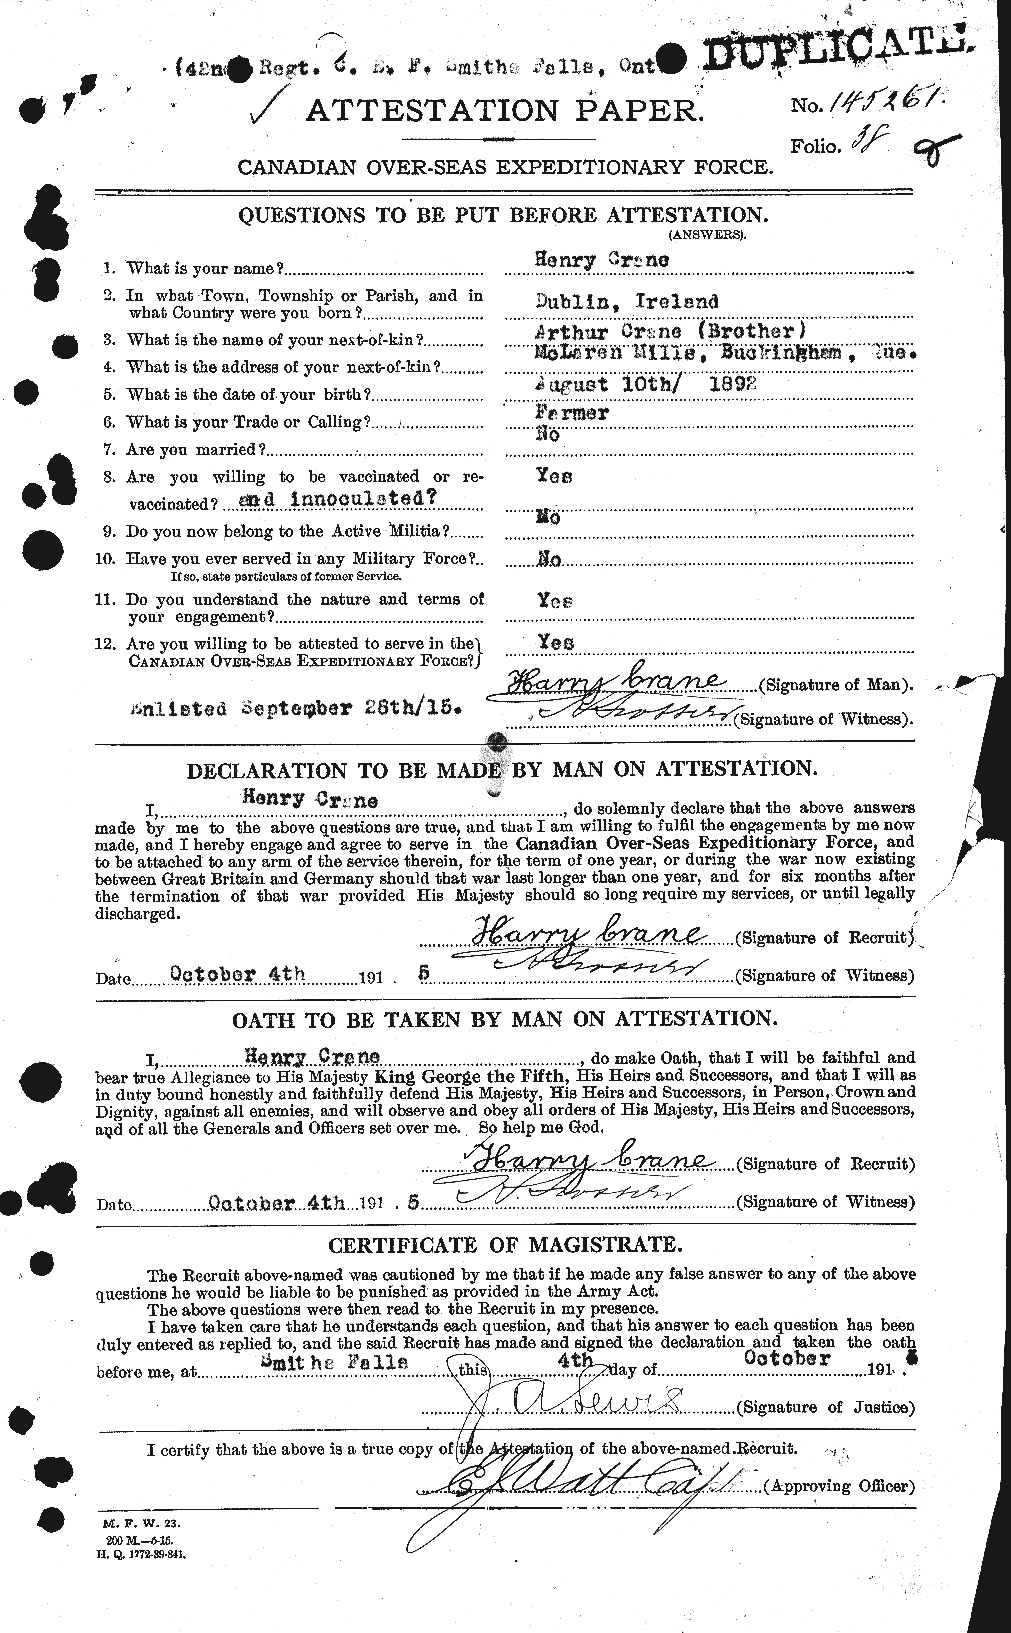 Personnel Records of the First World War - CEF 062001a